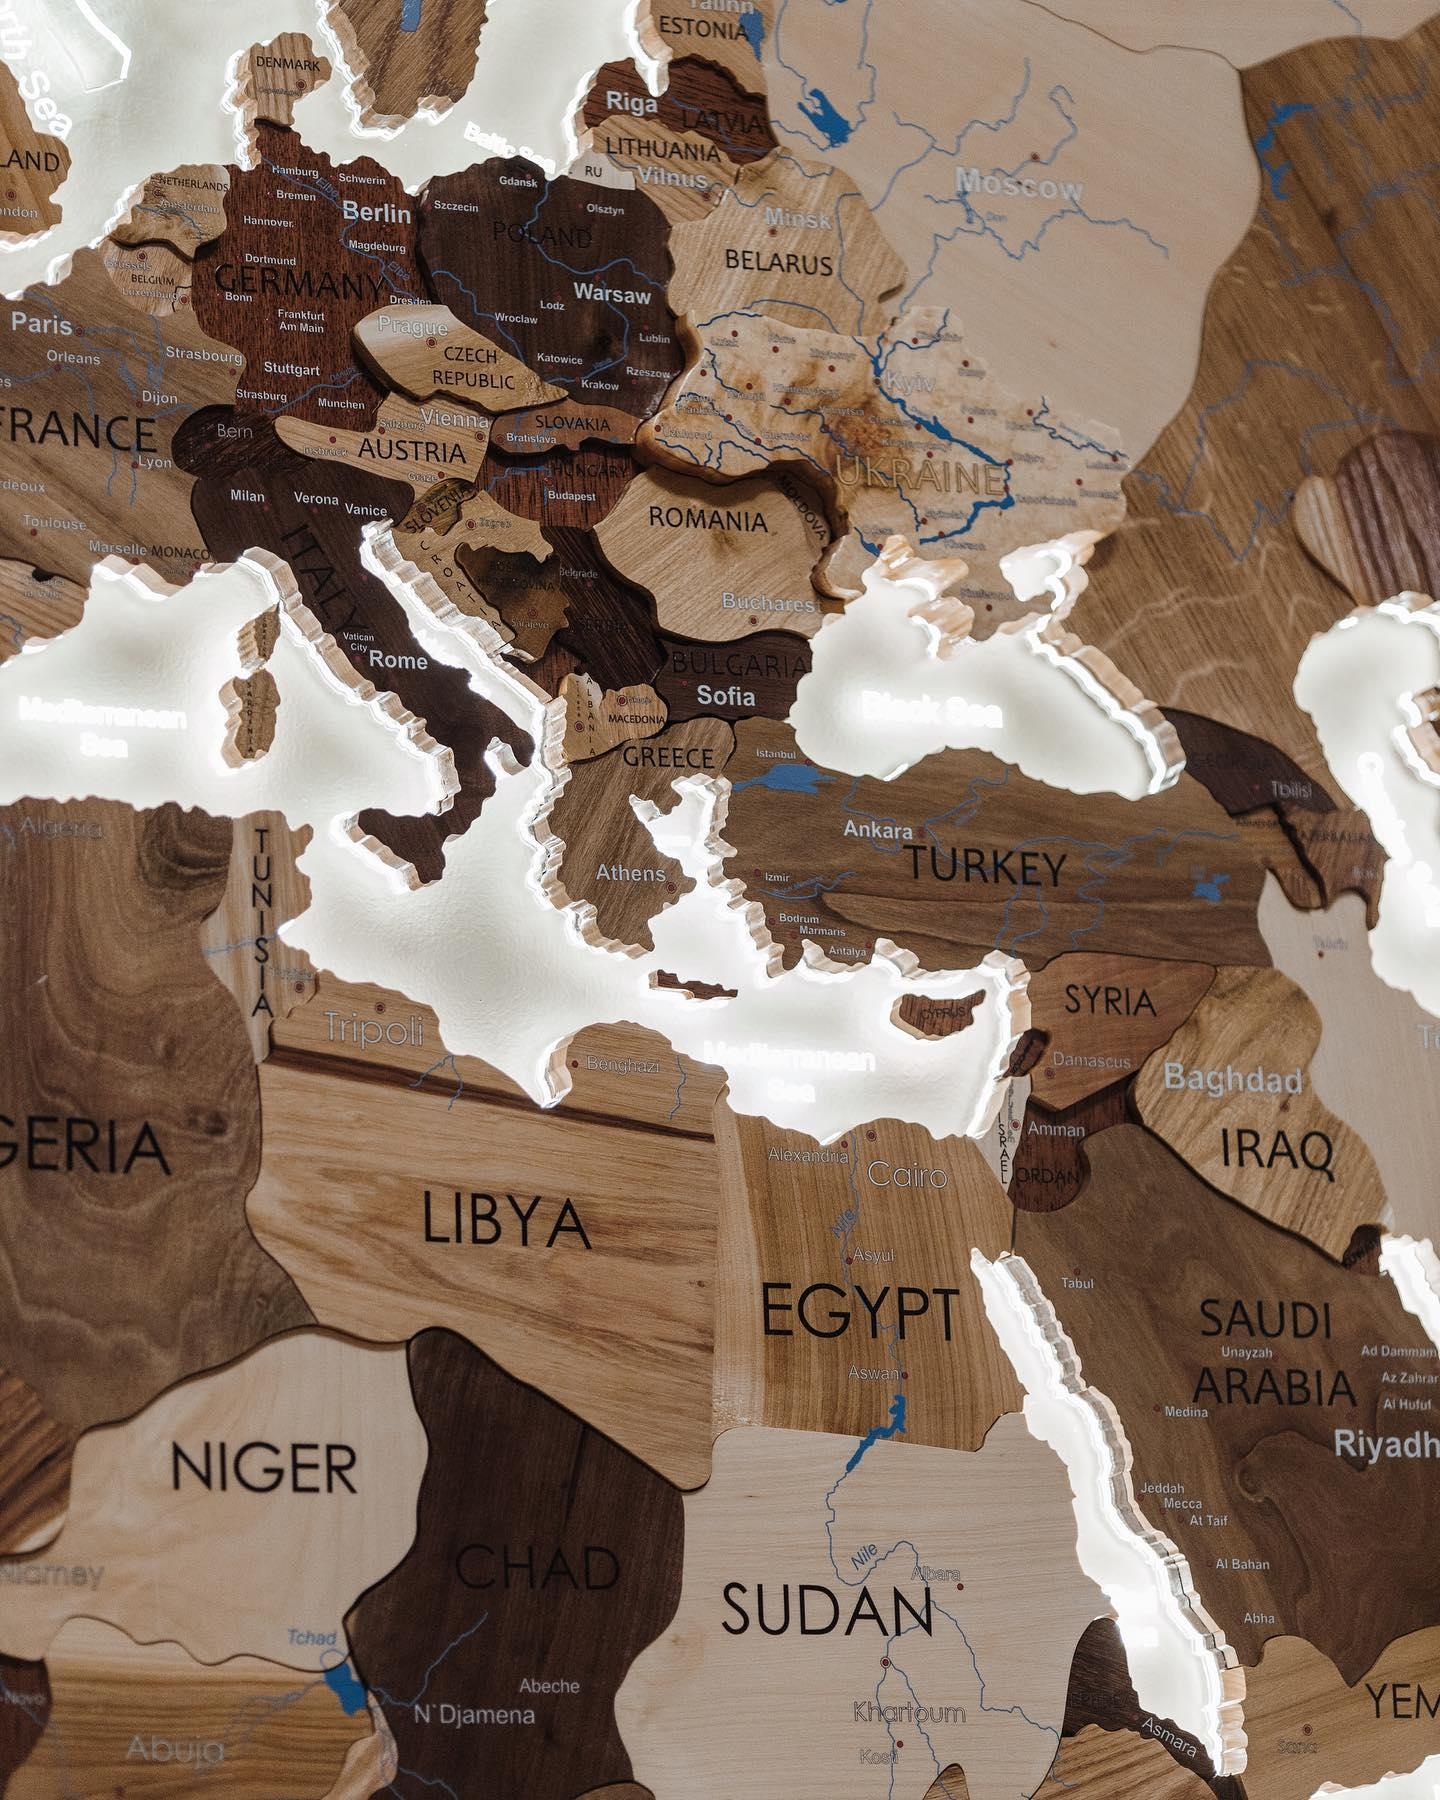 The largest wooden map of the world